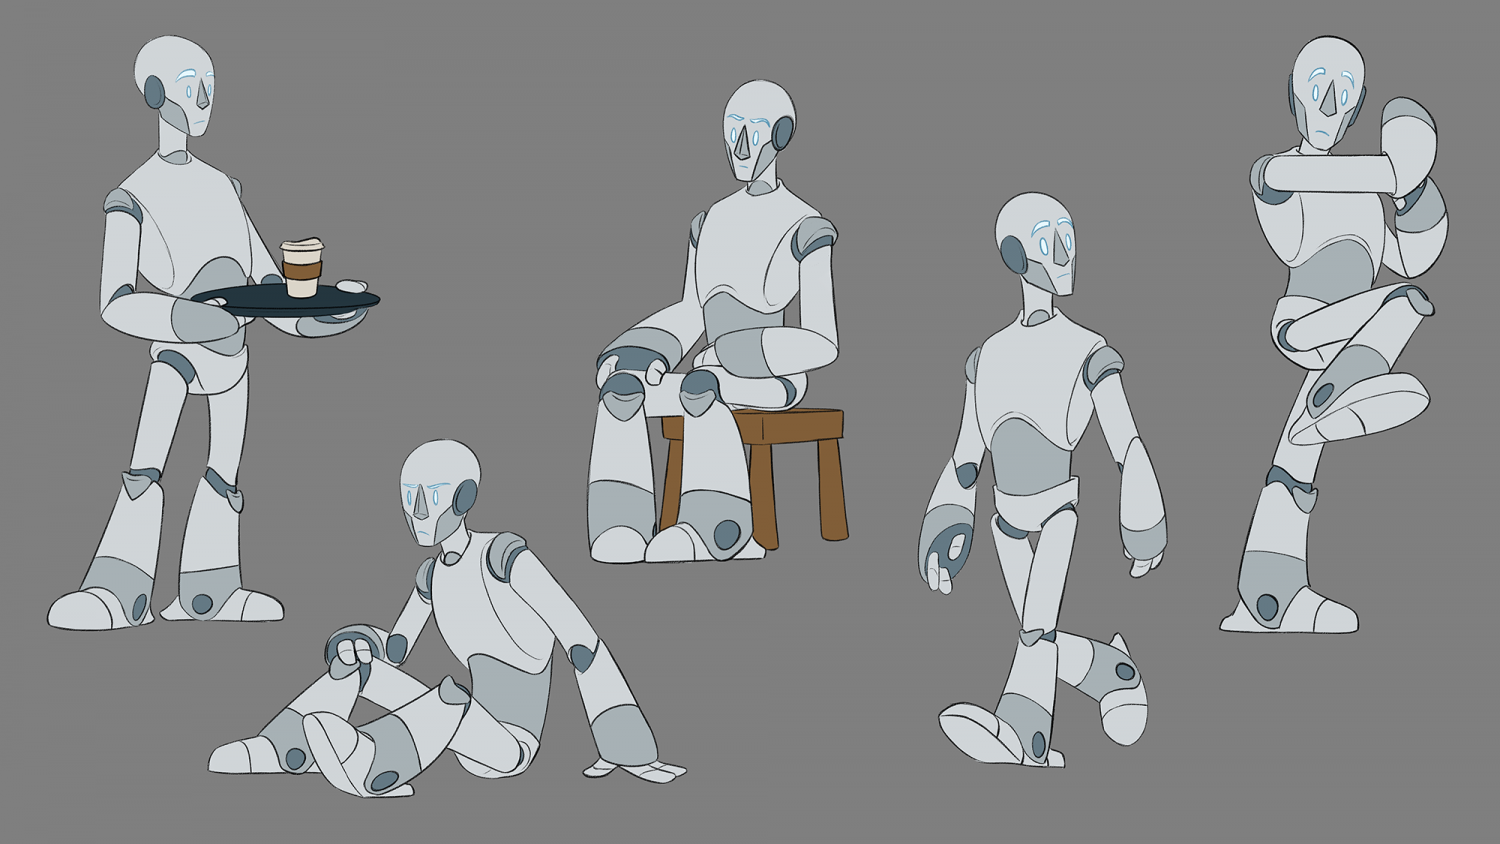 A set of poses displaying the character Logan in everyday activities, including carrying a tray with coffee cups, sitting both on the ground and on a chair, reacting to something surprising, and admiring the view as he walks.